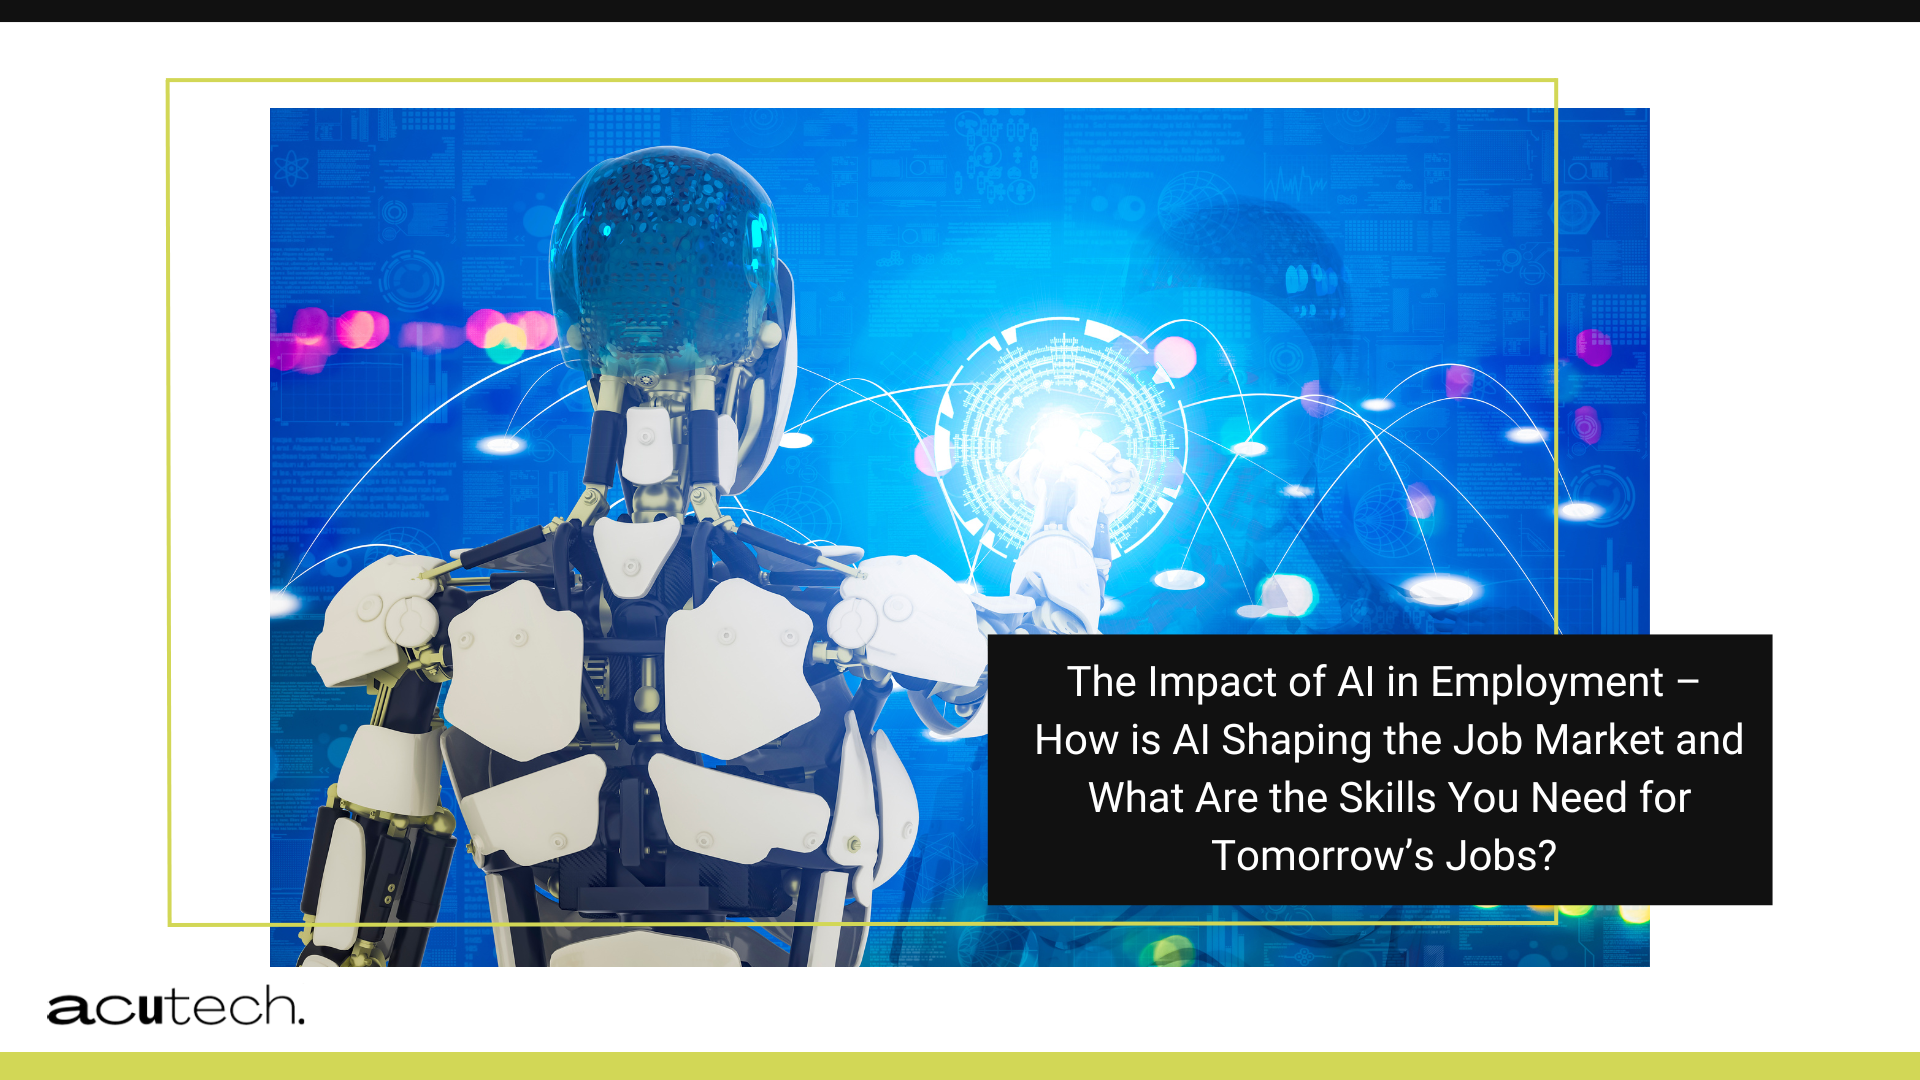 The Impact of AI in Employment – How is AI Shaping the Job Market and What Are the Skills You Need for Tomorrow’s Jobs?